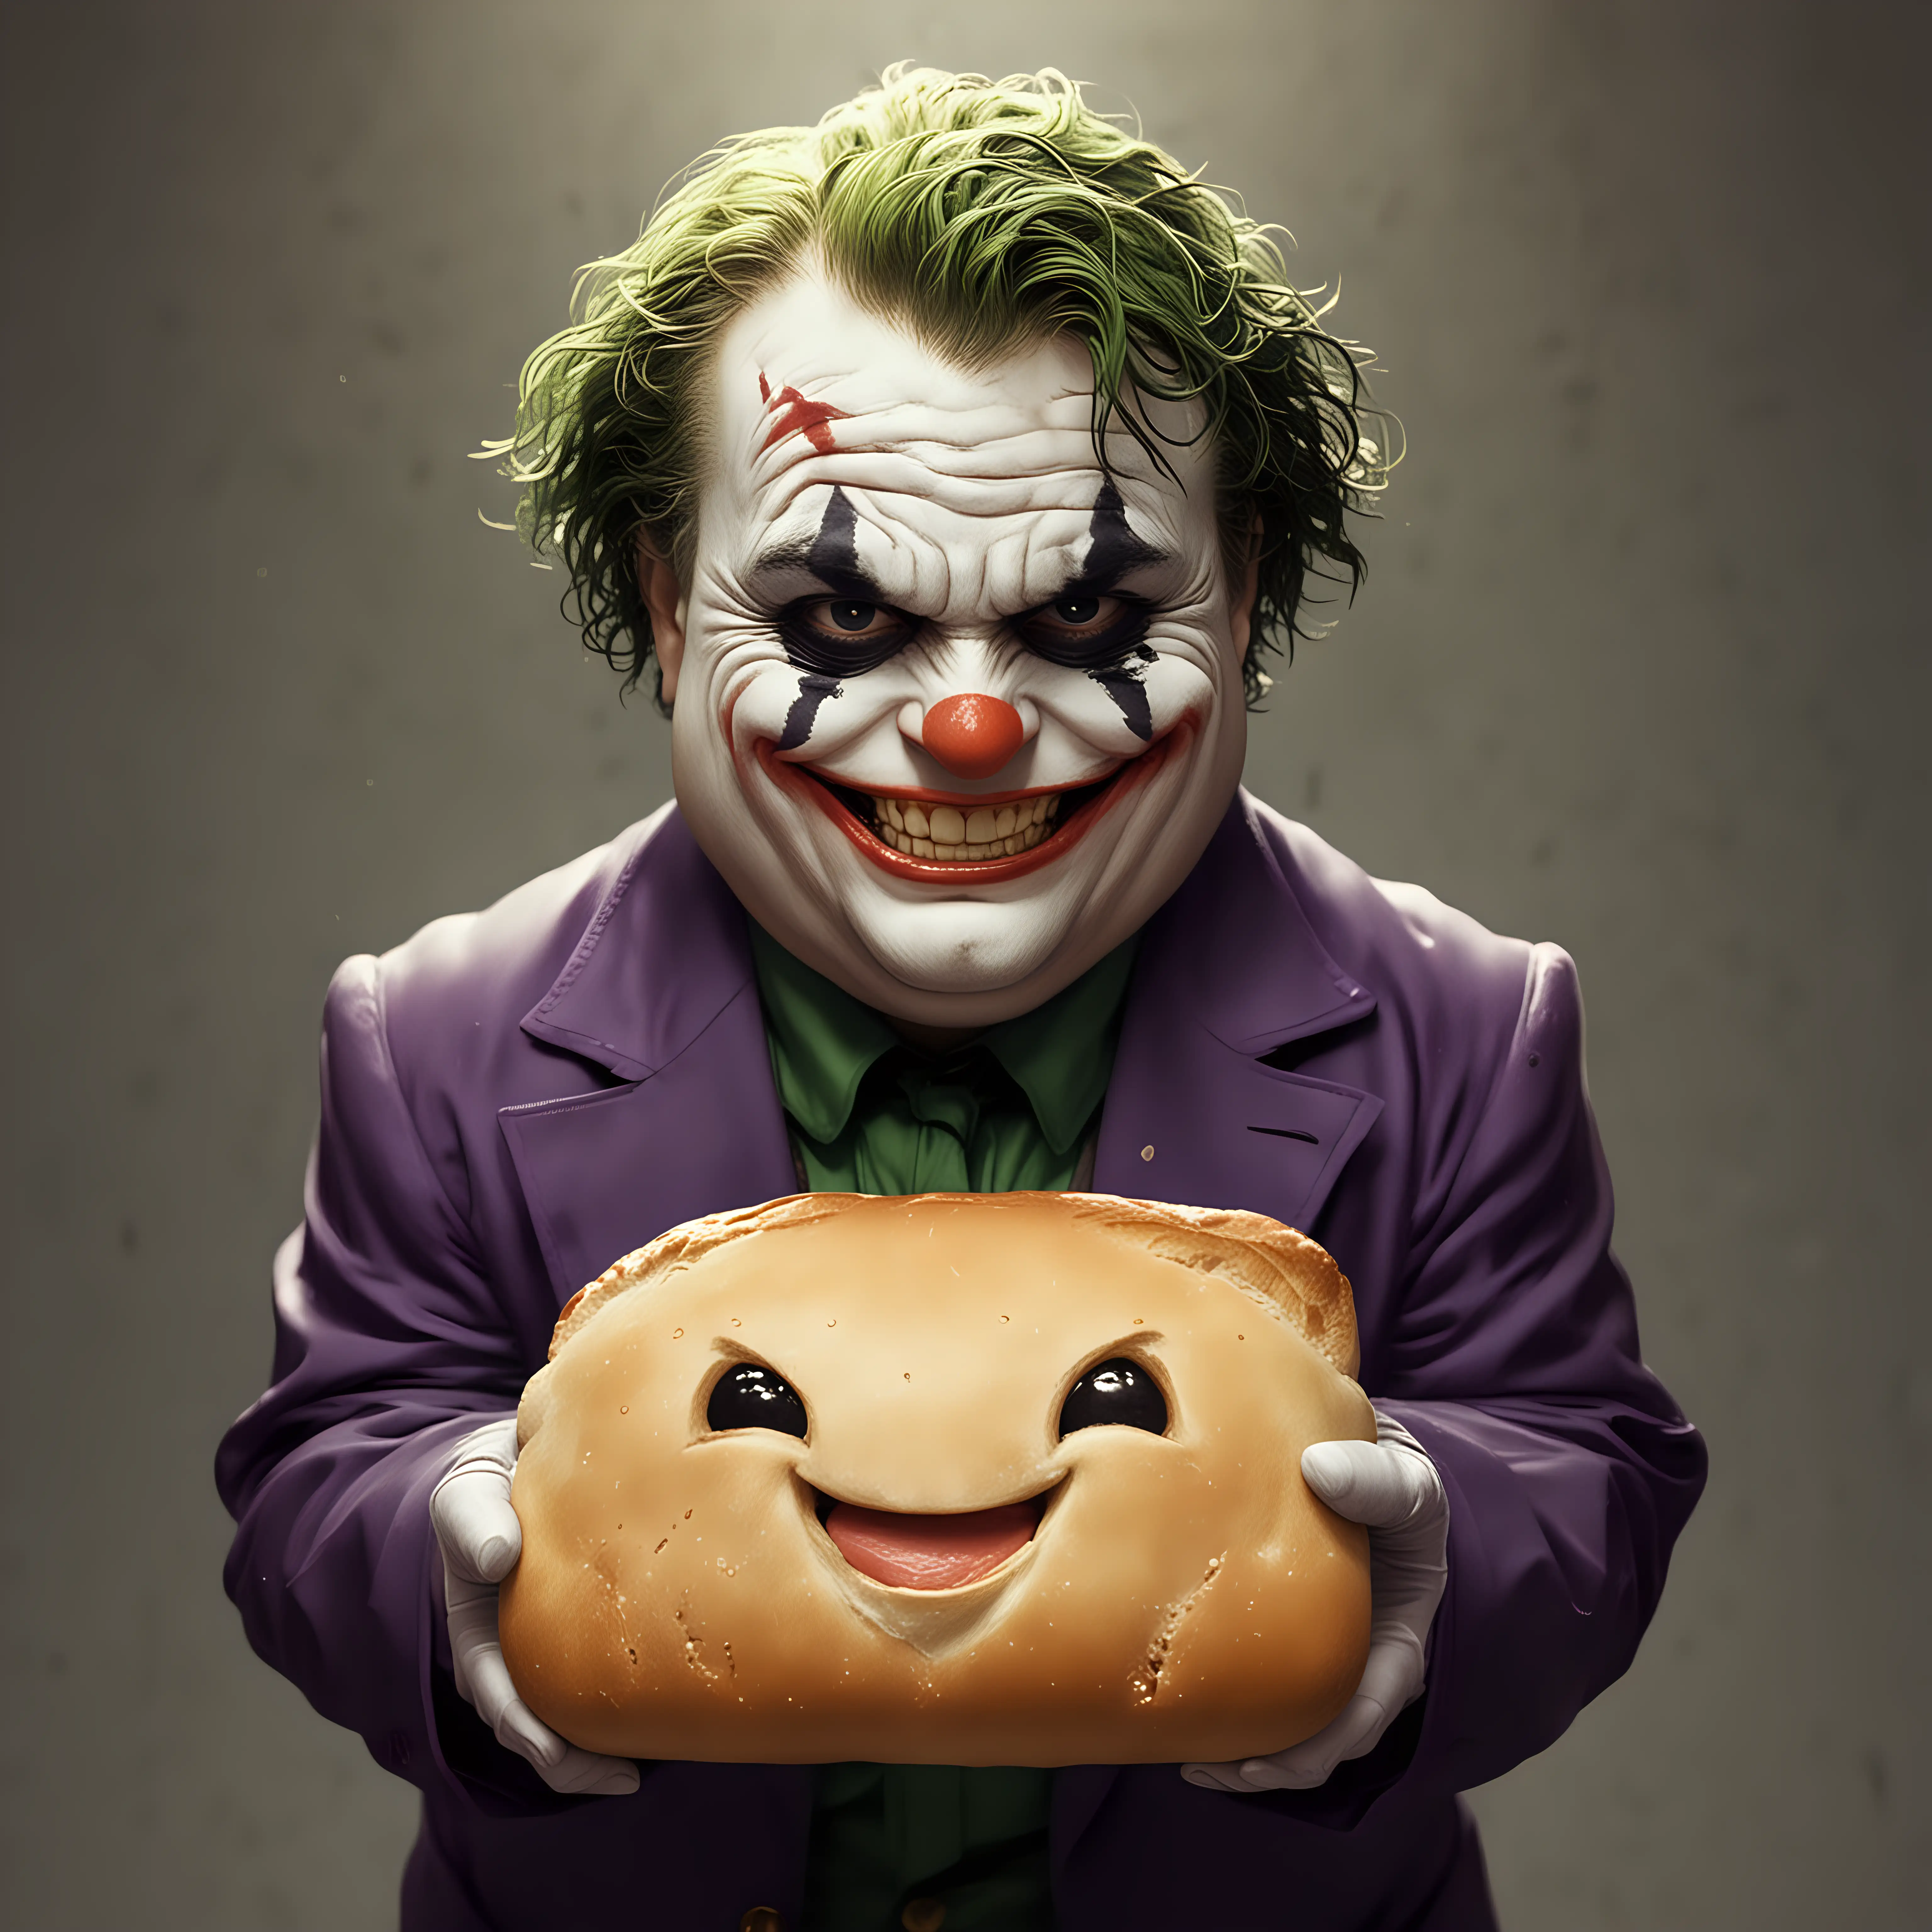 Cheerful Joker with a Loaf of Bread